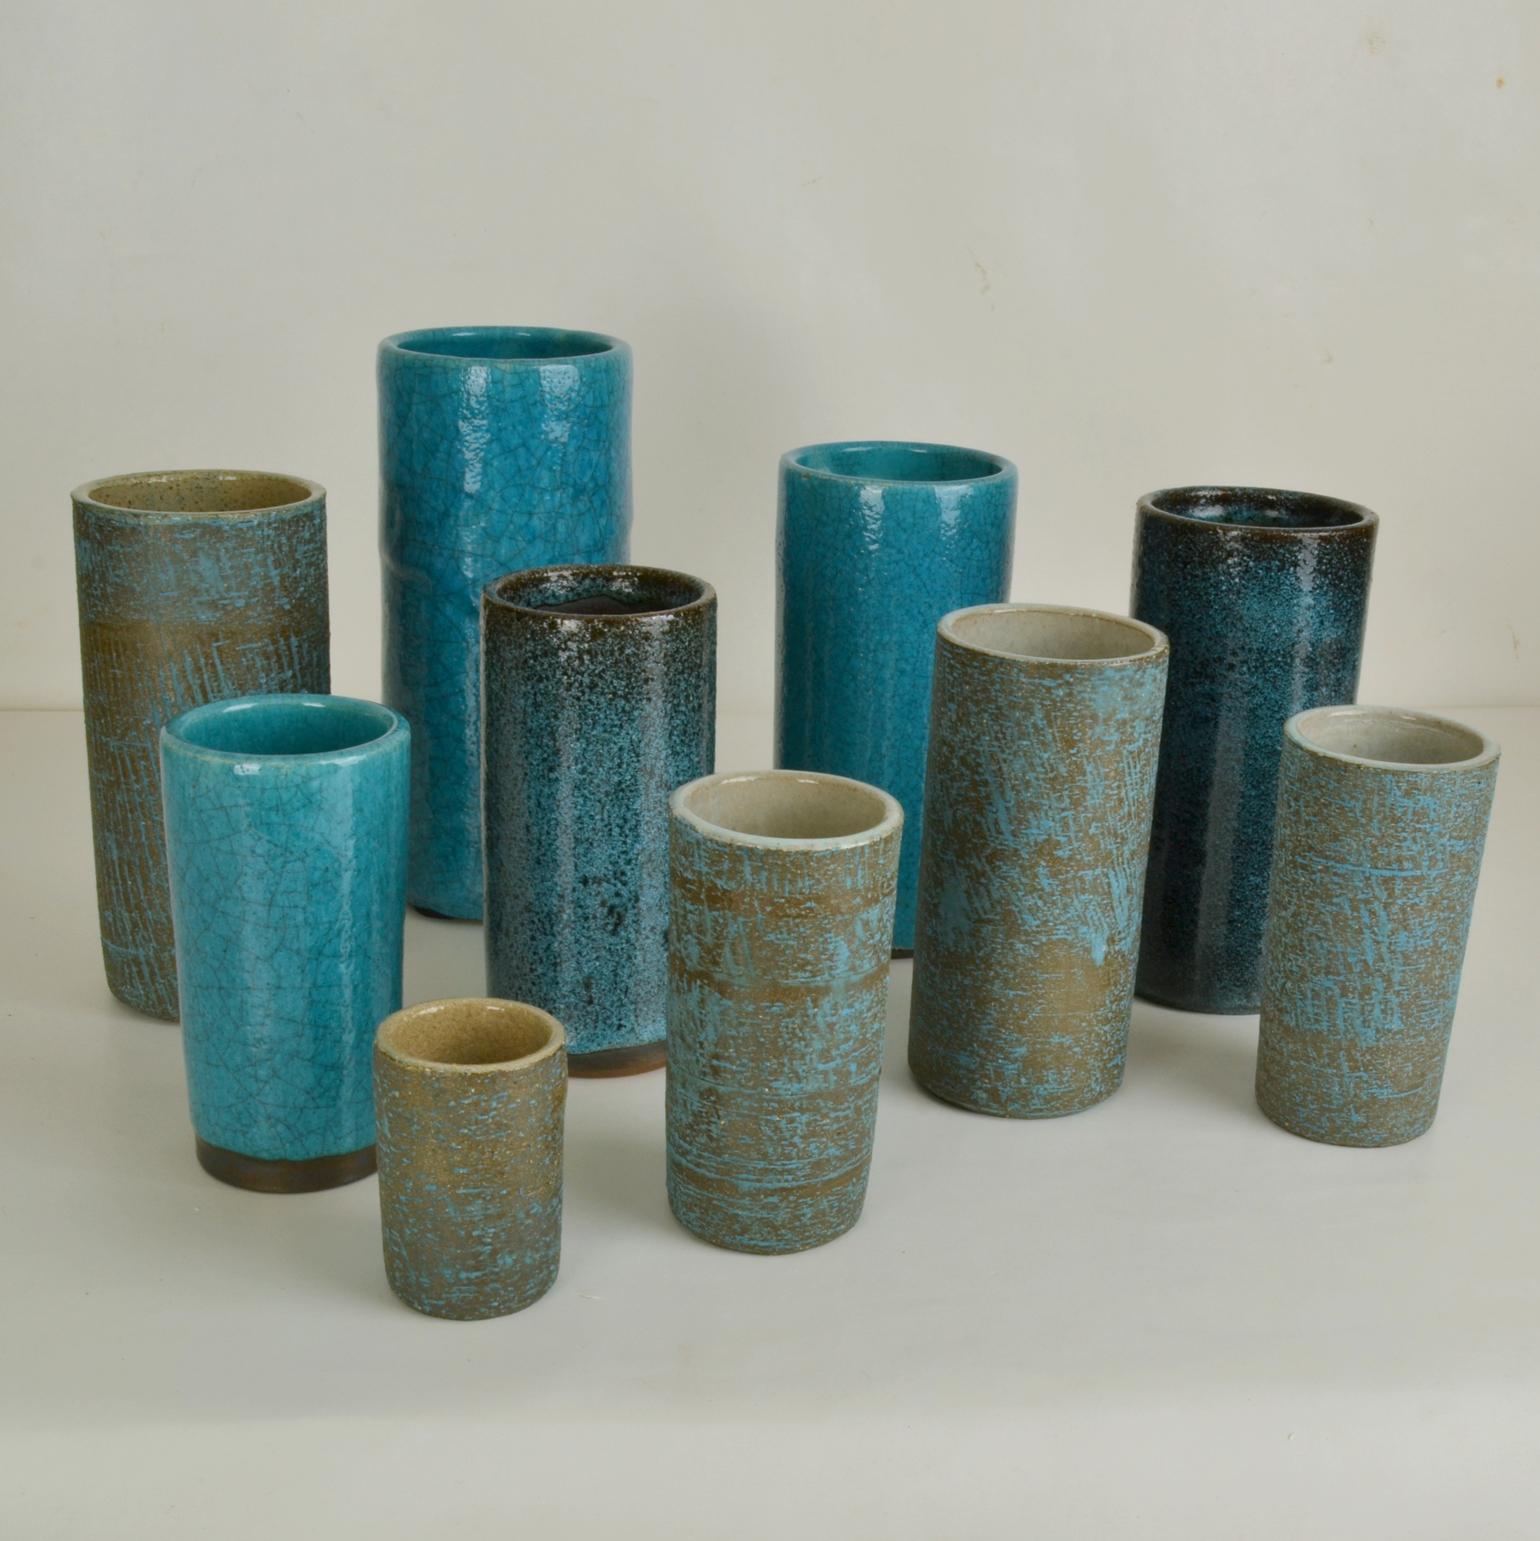 A set of ten studio ceramic cylinder vase of various heights in turquoise tones created in 3 different glazes produced in the 1960's. 
Pieter Groeneveldt ((1889-1982), born in Batavia, the former Dutch Indies. Groeneveldt was a Dutch artist and